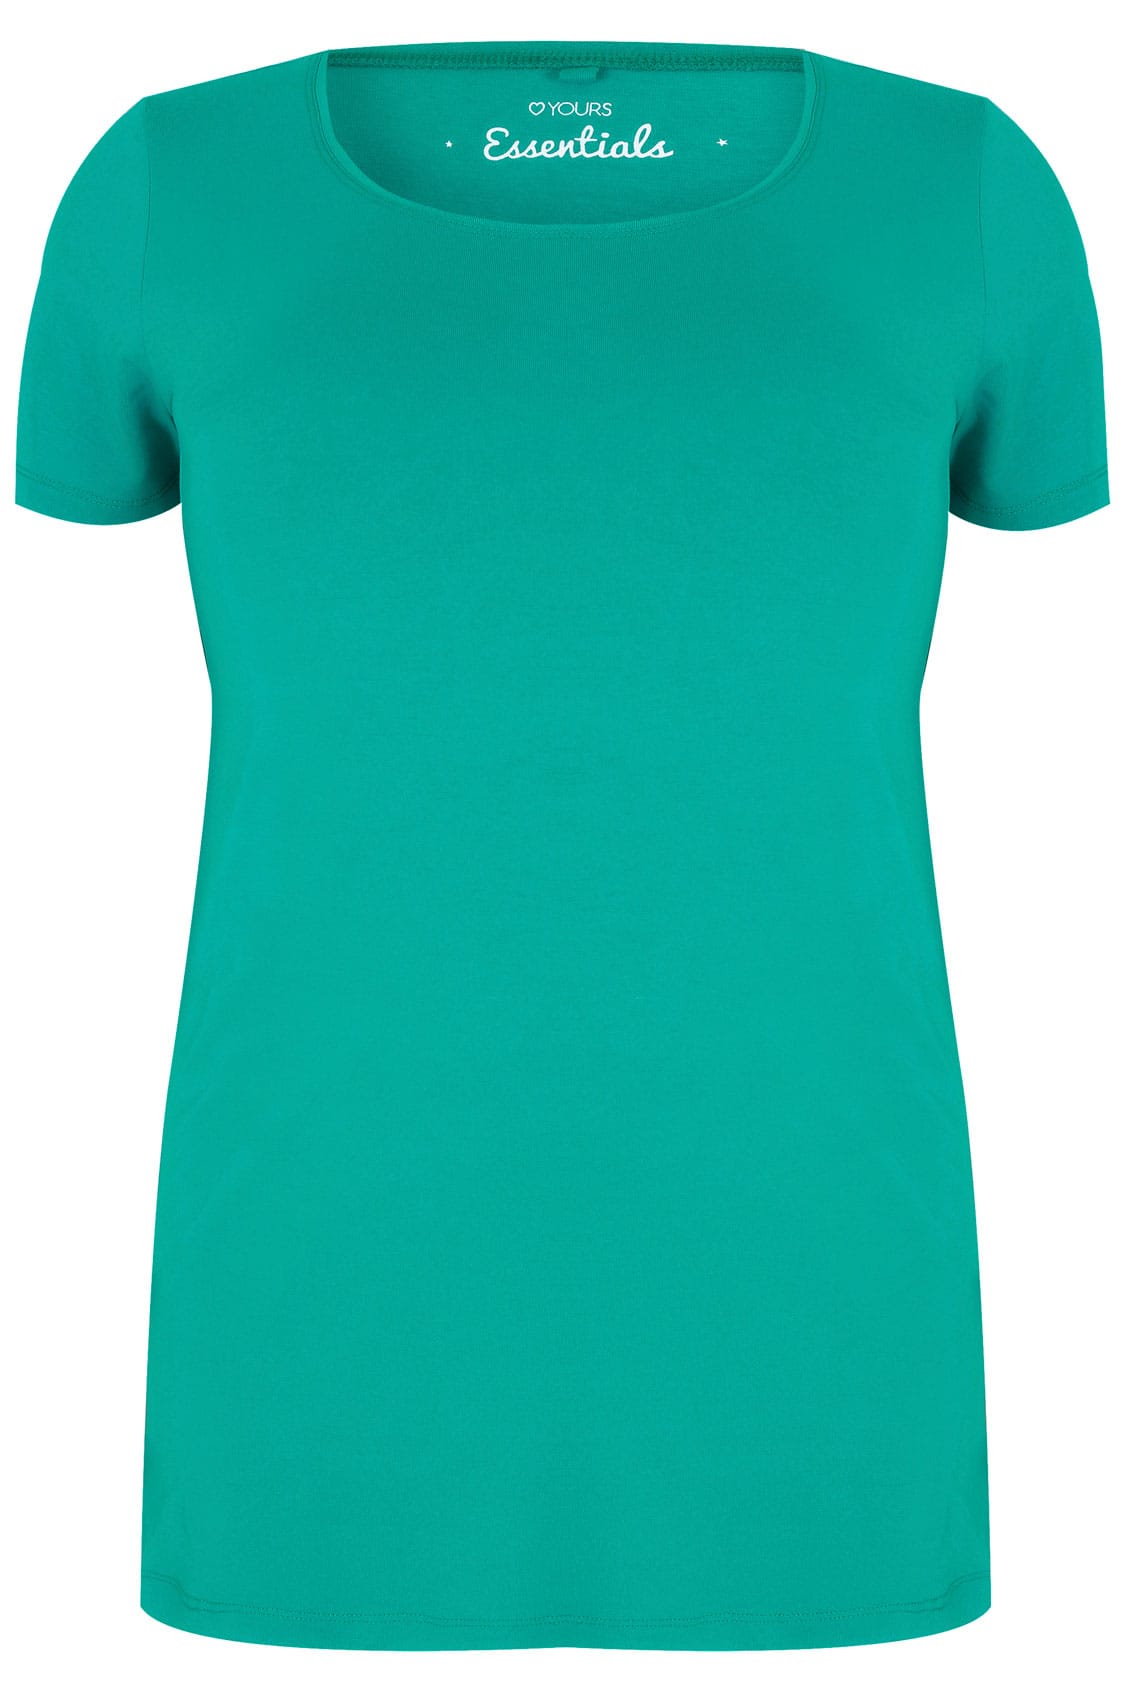 Jade Longline T-Shirt With Scooped Neck, Plus size 16 to 36